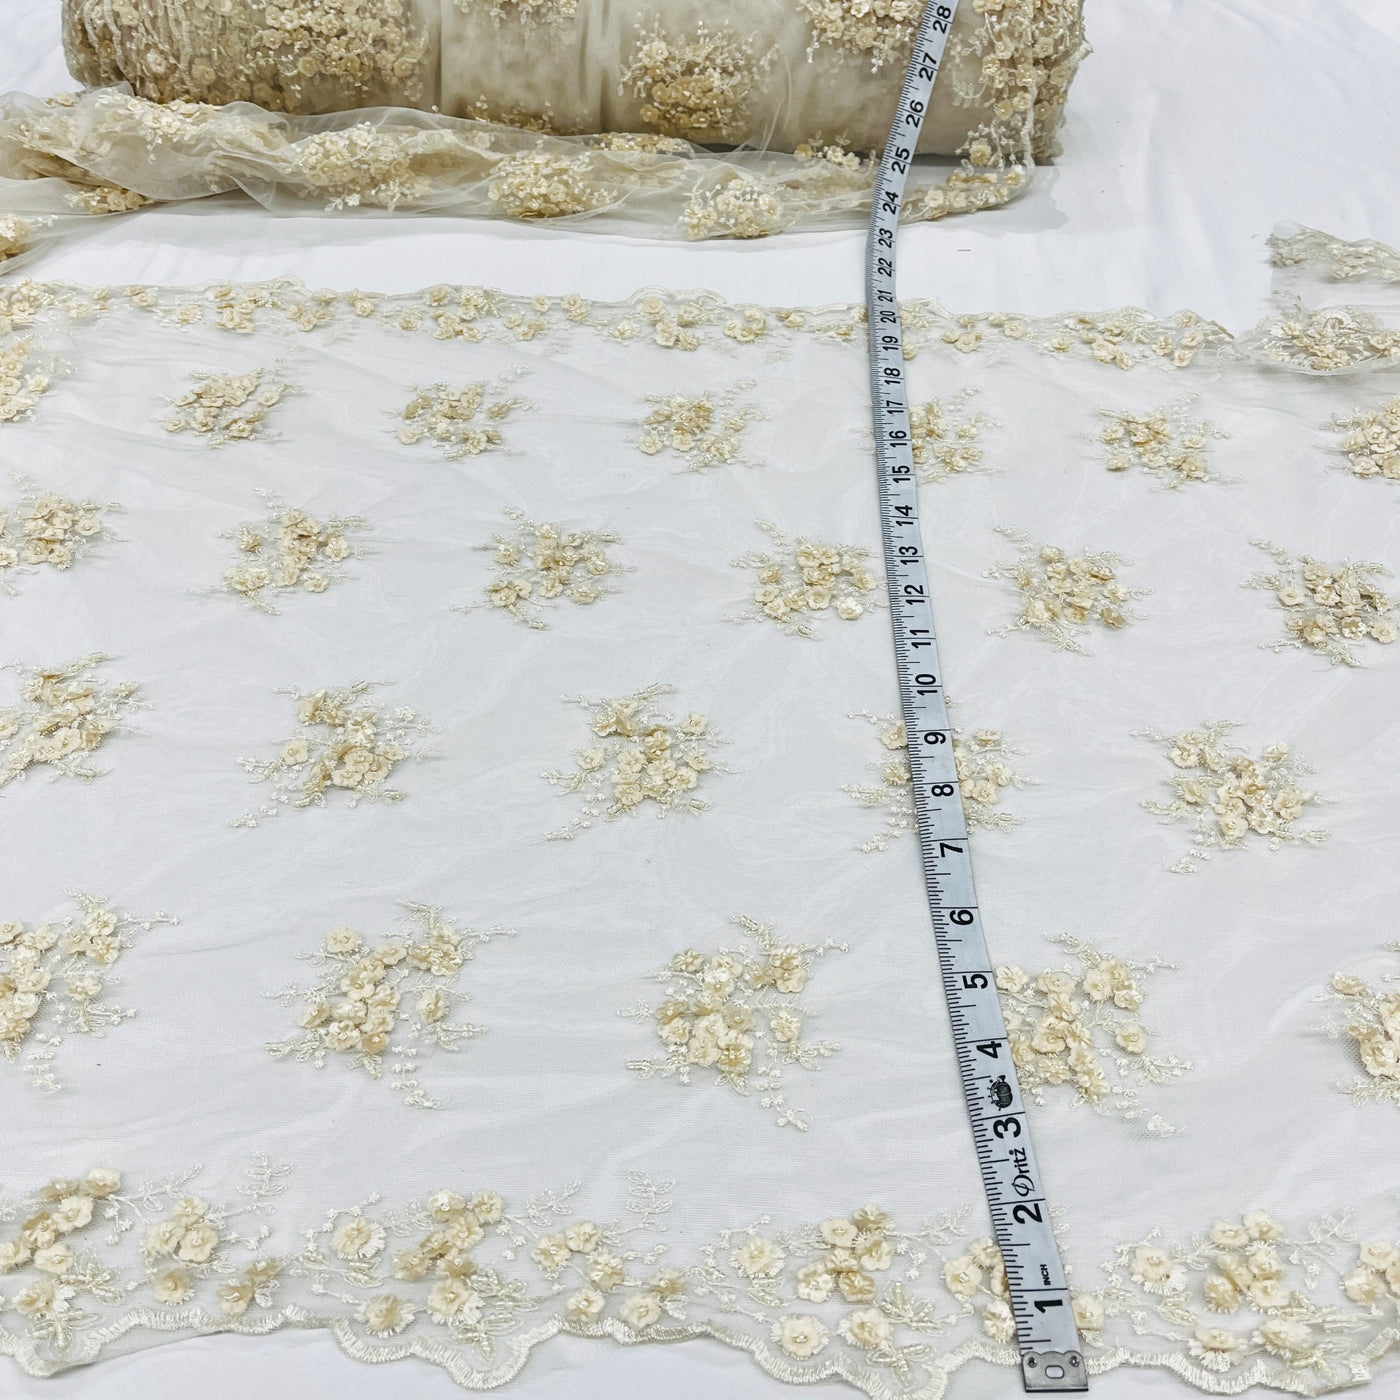 Beaded Double Sided 3D Floral Lace Trimming Embroidered on 100% Polyester Net Mesh | LaceUSA - GD-731